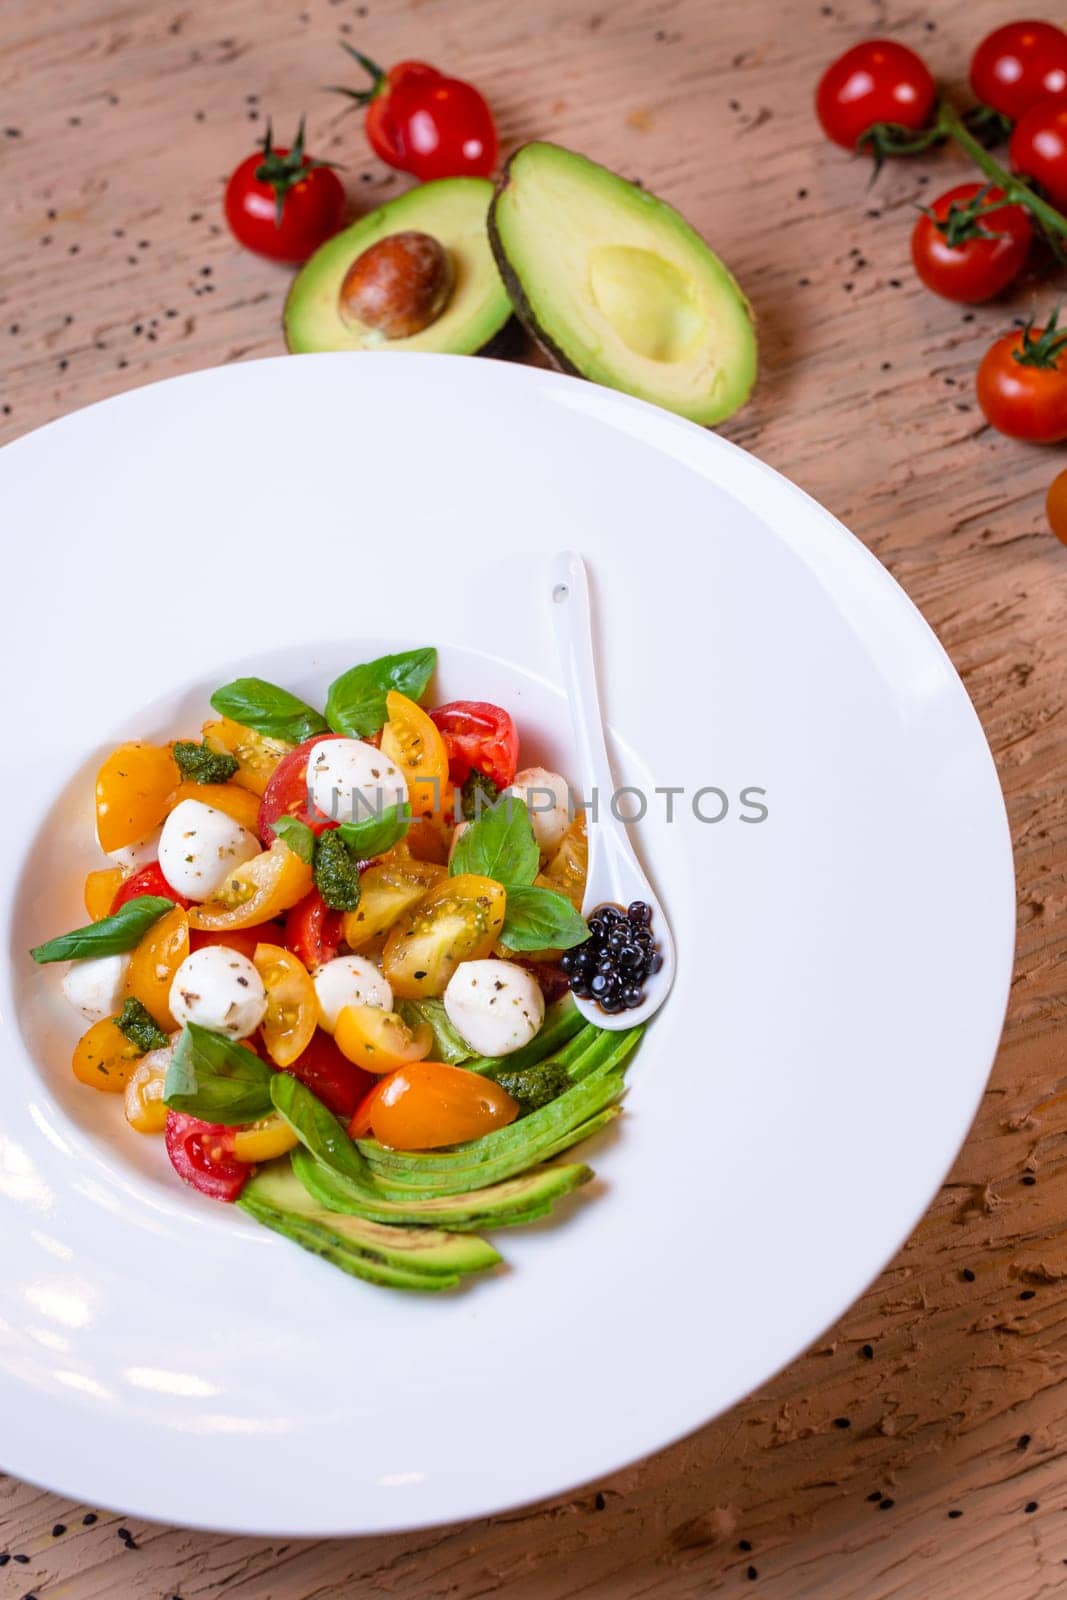 salad with avacado, mozzarella and tomatoes in a white plate by Pukhovskiy